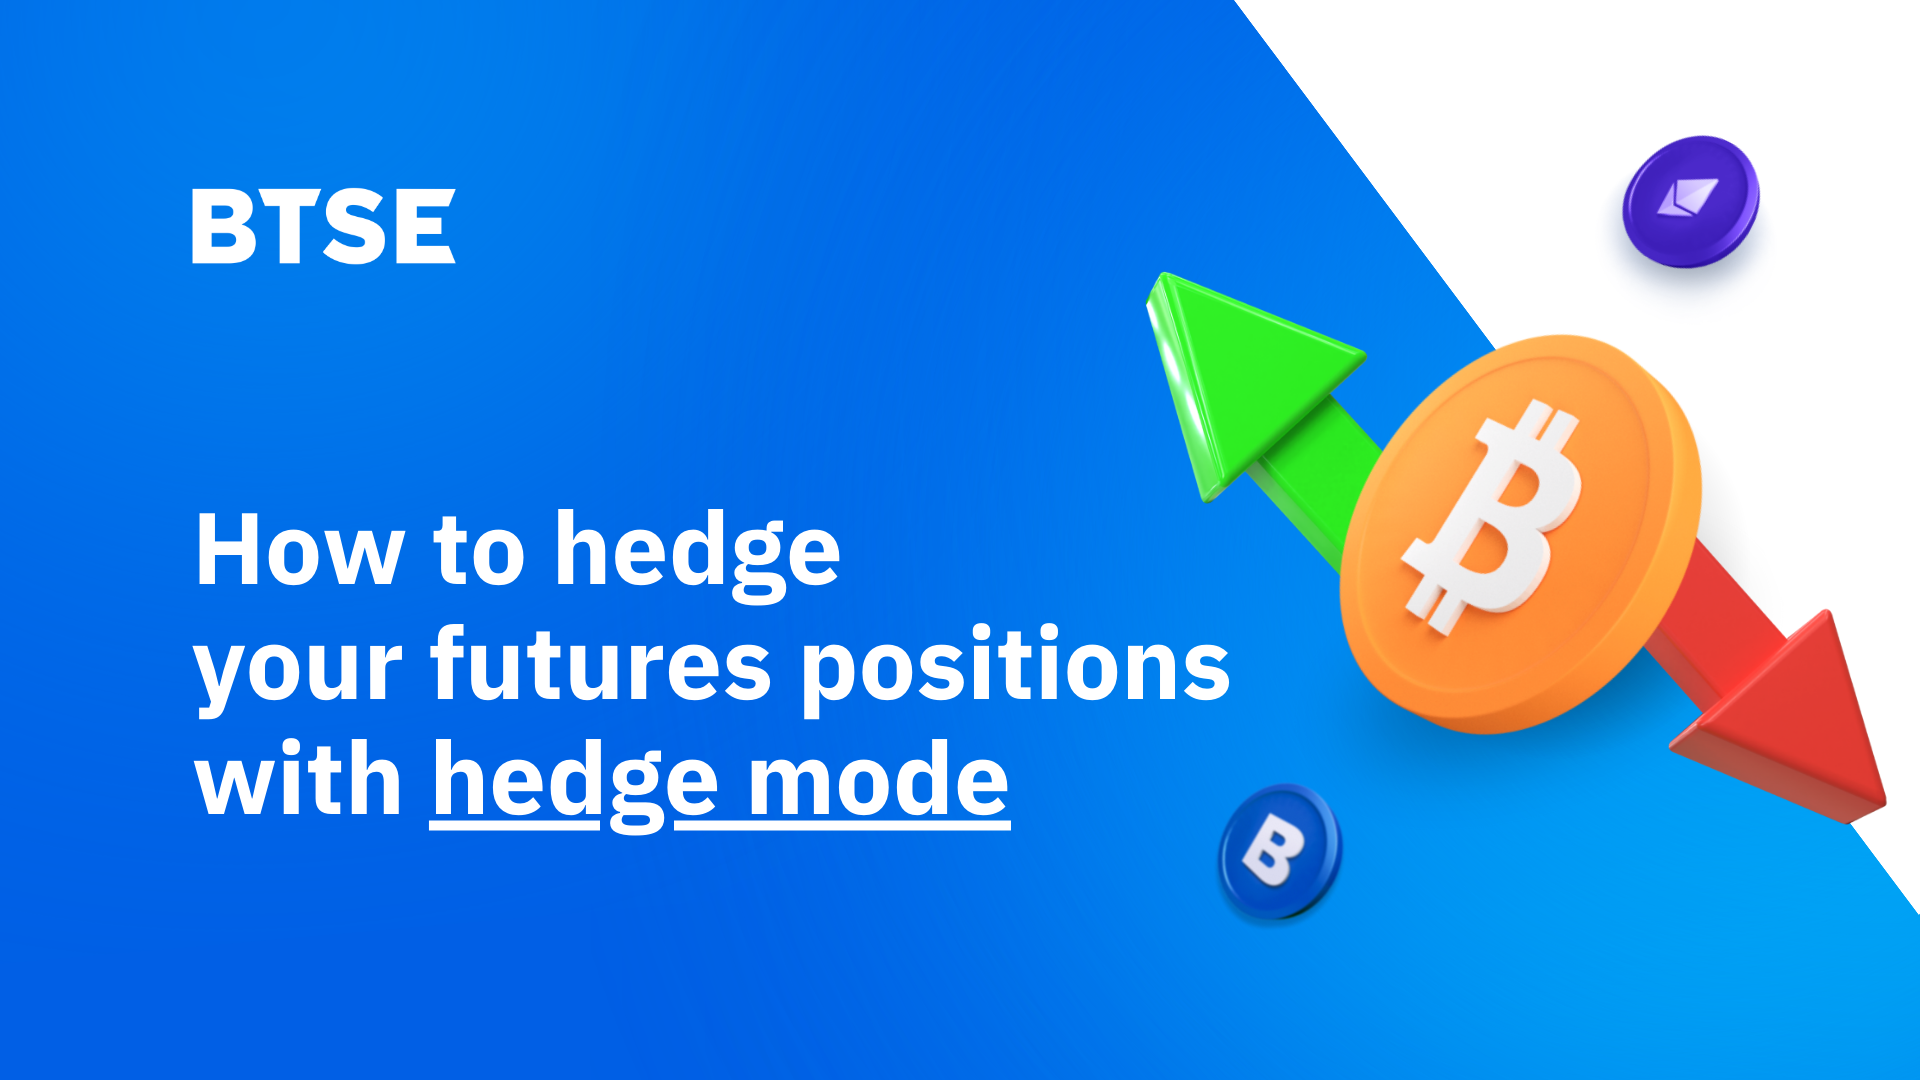 How to hedge your futures positions with hedge mode